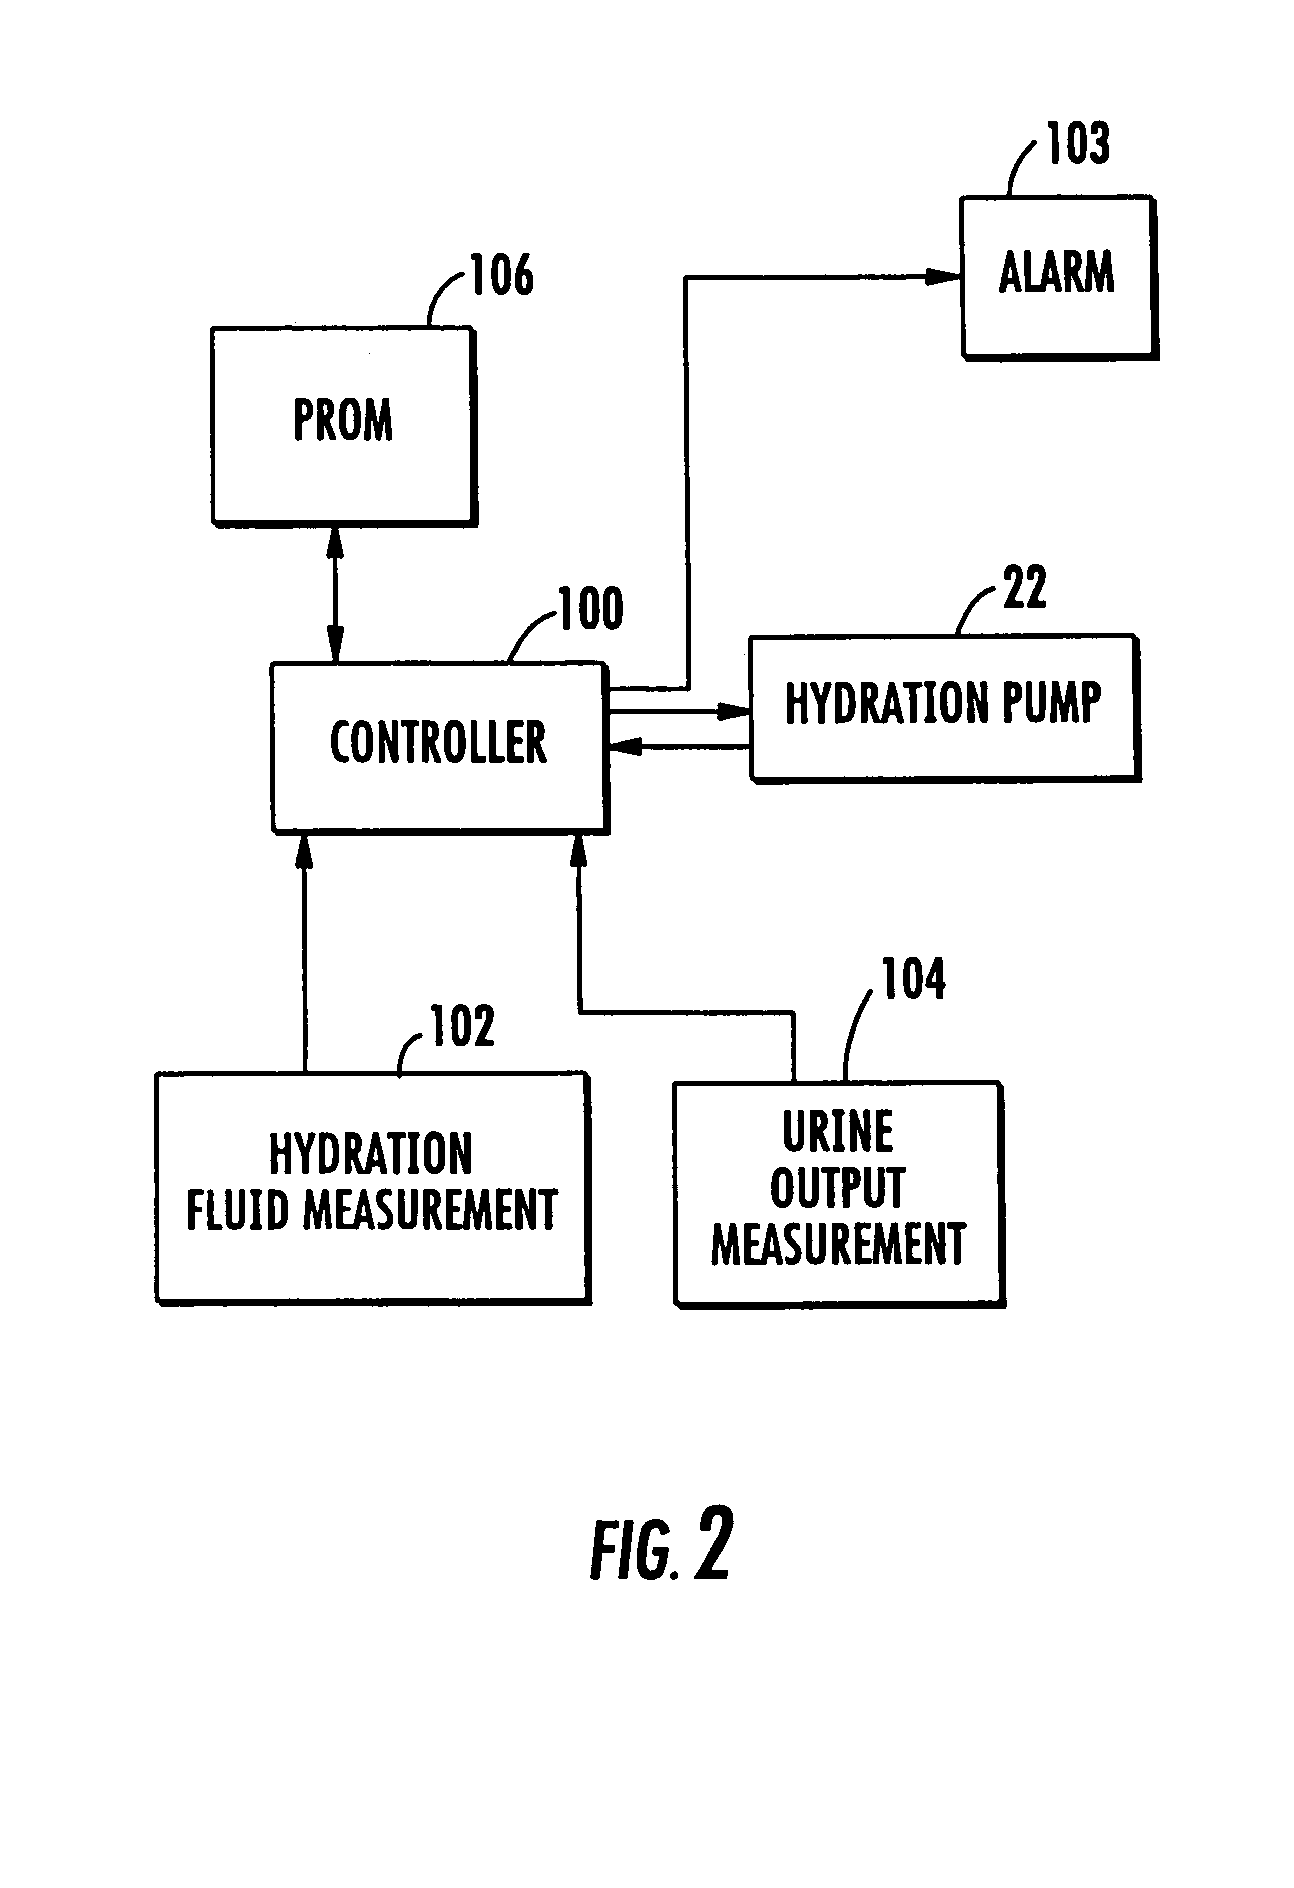 Patient hydration monitoring and maintenance system and method for use with administration of a diuretic